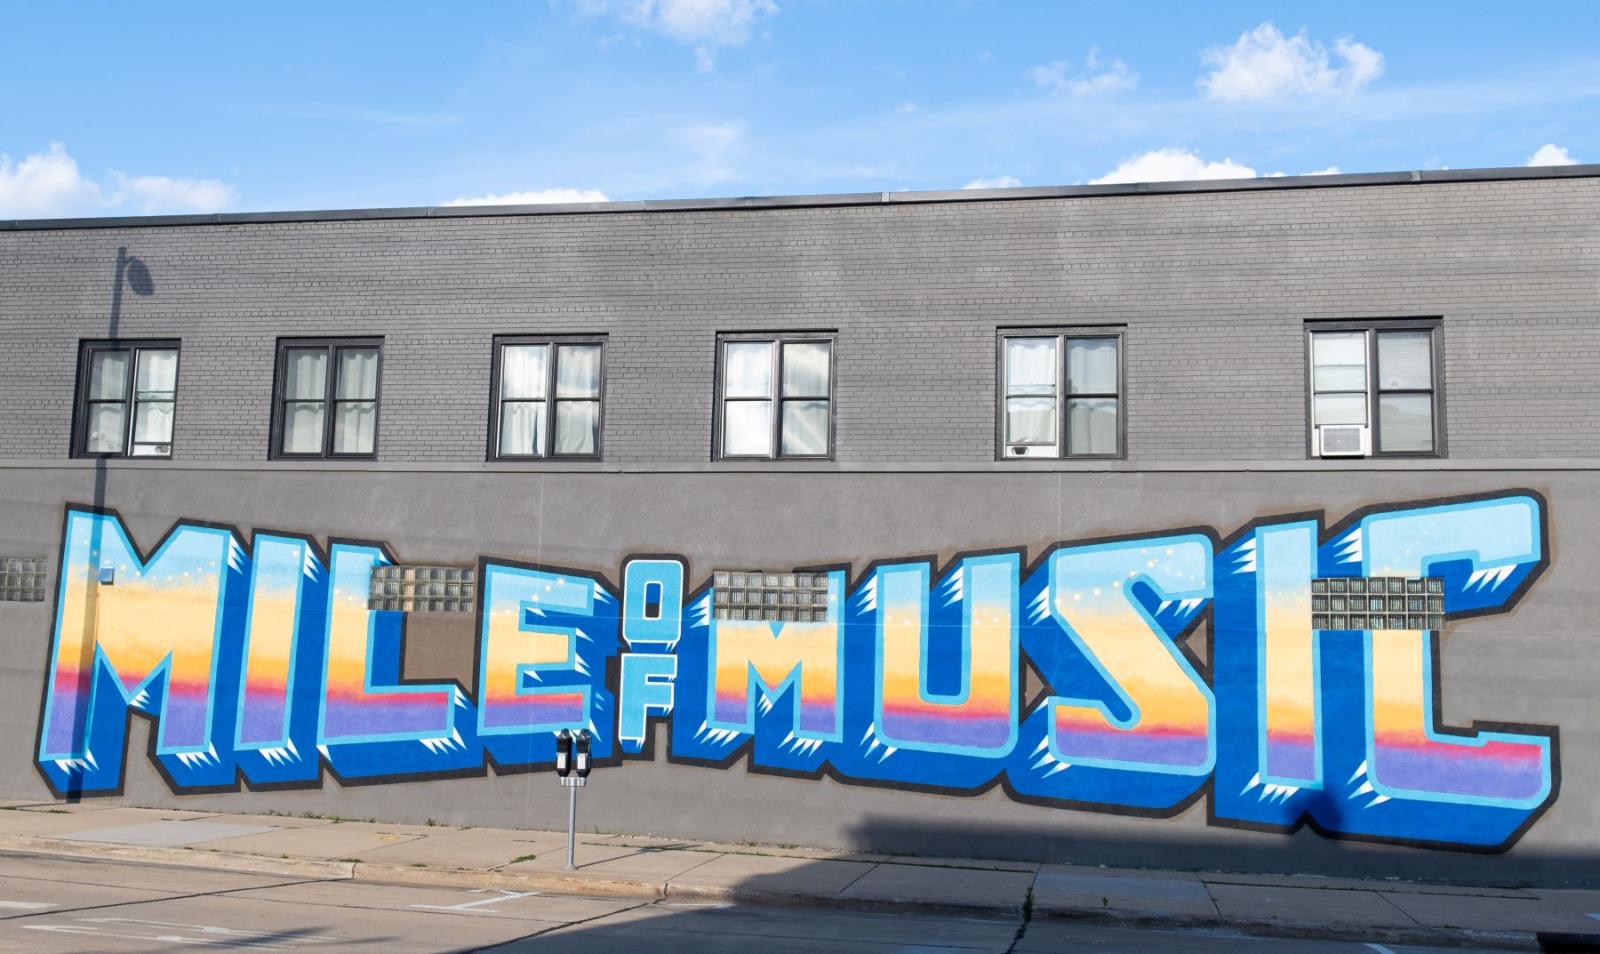 Mural of the words "Mile of Music" with blue, yellow, pin, and purple colors representing a sunrise